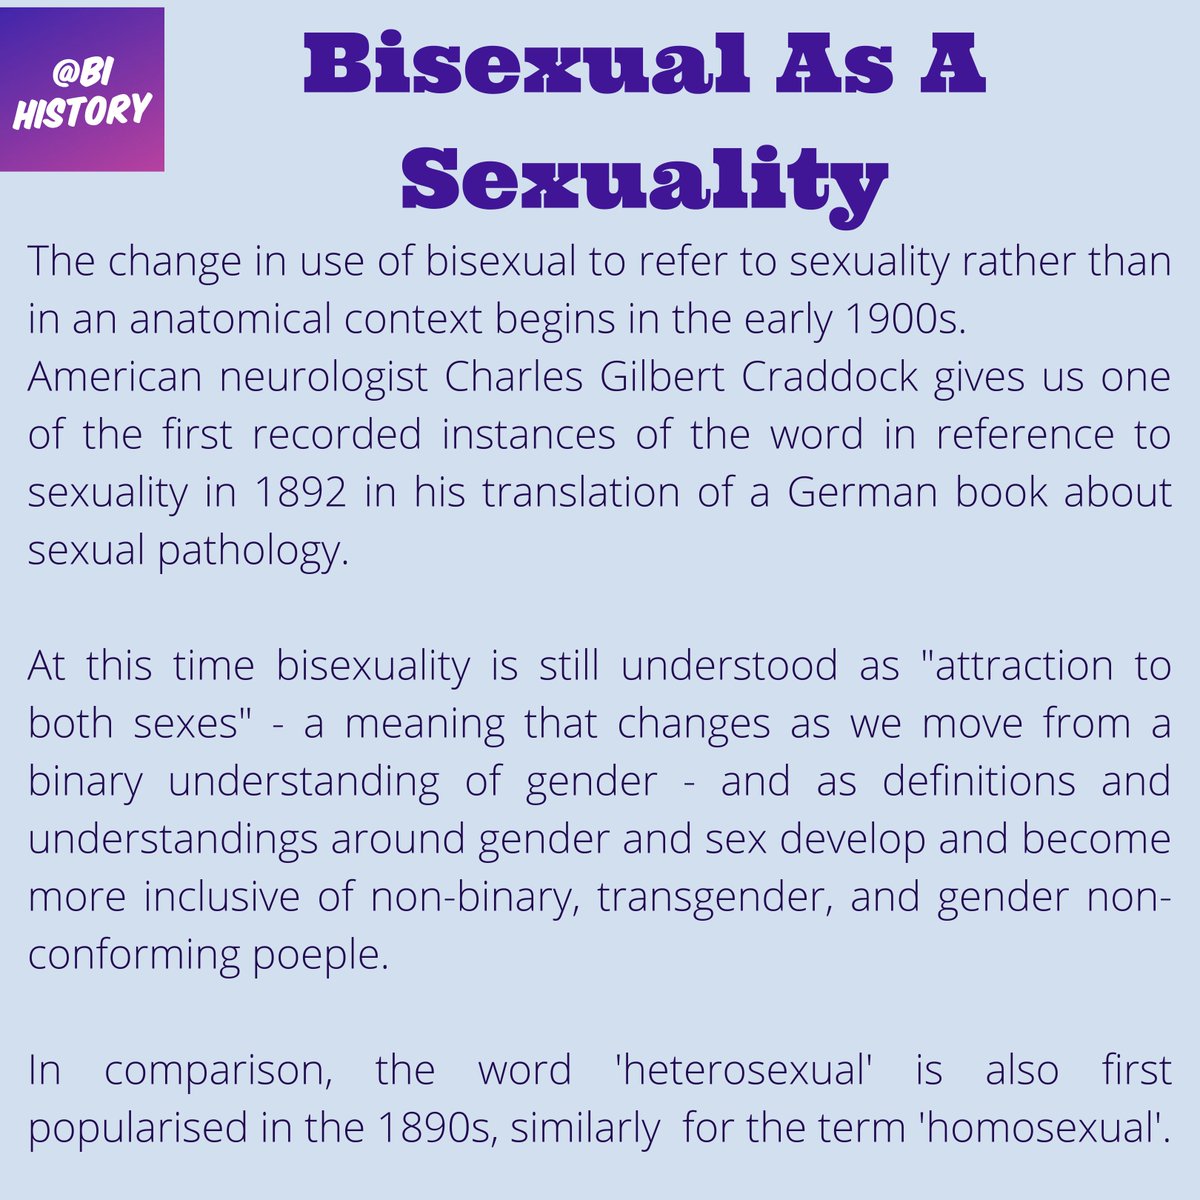 Where does the word 'bisexual' come from?